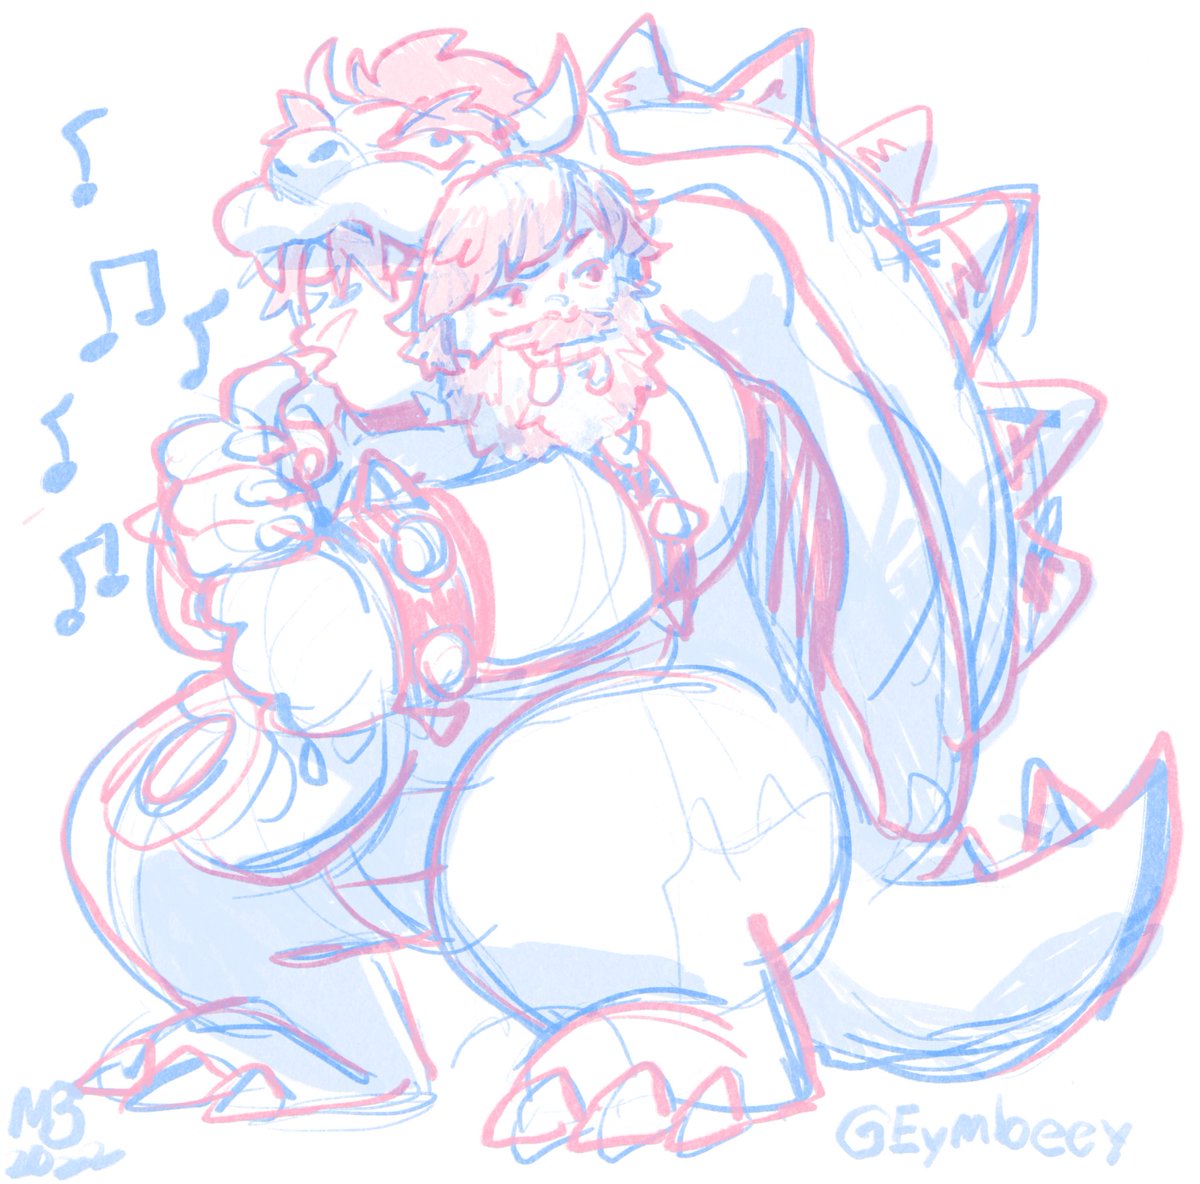 My character Neta in a Bowser onesie with a @jackblack mask playing the saxaboom as requested by mods 😂